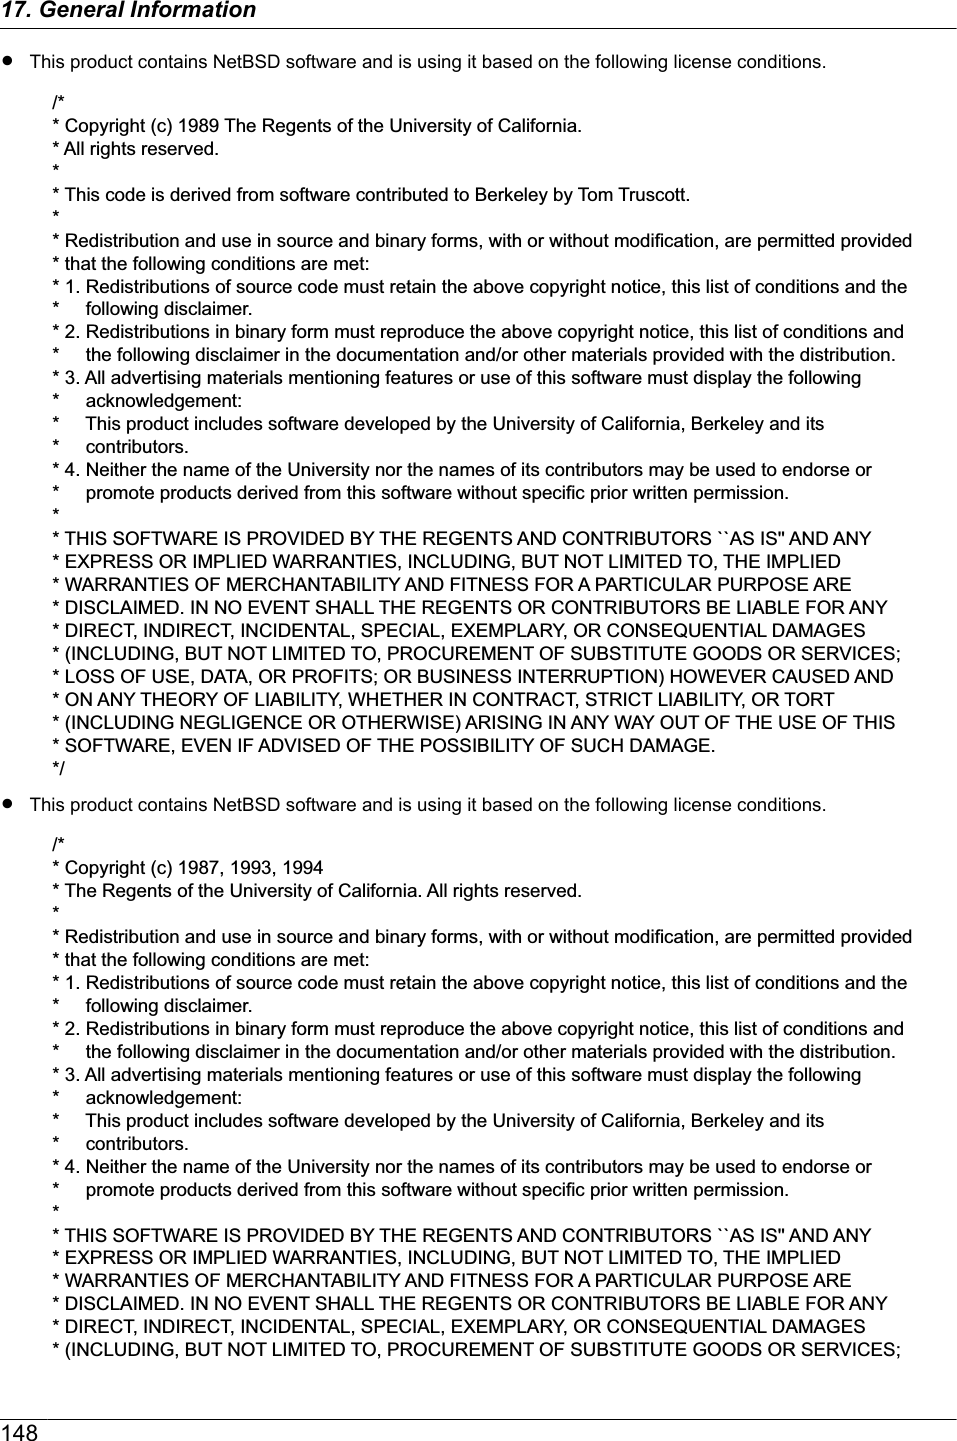 RThis product contains NetBSD software and is using it based on the following license conditions./** Copyright (c) 1989 The Regents of the University of California.* All rights reserved.** This code is derived from software contributed to Berkeley by Tom Truscott.** Redistribution and use in source and binary forms, with or without modification, are permitted provided * that the following conditions are met:* 1. Redistributions of source code must retain the above copyright notice, this list of conditions and the *     following disclaimer.* 2. Redistributions in binary form must reproduce the above copyright notice, this list of conditions and *     the following disclaimer in the documentation and/or other materials provided with the distribution.* 3. All advertising materials mentioning features or use of this software must display the following *     acknowledgement:*     This product includes software developed by the University of California, Berkeley and its *     contributors.* 4. Neither the name of the University nor the names of its contributors may be used to endorse or *     promote products derived from this software without specific prior written permission.** THIS SOFTWARE IS PROVIDED BY THE REGENTS AND CONTRIBUTORS ``AS IS&apos;&apos; AND ANY * EXPRESS OR IMPLIED WARRANTIES, INCLUDING, BUT NOT LIMITED TO, THE IMPLIED * WARRANTIES OF MERCHANTABILITY AND FITNESS FOR A PARTICULAR PURPOSE ARE * DISCLAIMED. IN NO EVENT SHALL THE REGENTS OR CONTRIBUTORS BE LIABLE FOR ANY * DIRECT, INDIRECT, INCIDENTAL, SPECIAL, EXEMPLARY, OR CONSEQUENTIAL DAMAGES * (INCLUDING, BUT NOT LIMITED TO, PROCUREMENT OF SUBSTITUTE GOODS OR SERVICES; * LOSS OF USE, DATA, OR PROFITS; OR BUSINESS INTERRUPTION) HOWEVER CAUSED AND * ON ANY THEORY OF LIABILITY, WHETHER IN CONTRACT, STRICT LIABILITY, OR TORT * (INCLUDING NEGLIGENCE OR OTHERWISE) ARISING IN ANY WAY OUT OF THE USE OF THIS * SOFTWARE, EVEN IF ADVISED OF THE POSSIBILITY OF SUCH DAMAGE.*/RThis product contains NetBSD software and is using it based on the following license conditions./** Copyright (c) 1987, 1993, 1994* The Regents of the University of California. All rights reserved.** Redistribution and use in source and binary forms, with or without modification, are permitted provided * that the following conditions are met:* 1. Redistributions of source code must retain the above copyright notice, this list of conditions and the *     following disclaimer.* 2. Redistributions in binary form must reproduce the above copyright notice, this list of conditions and *     the following disclaimer in the documentation and/or other materials provided with the distribution.* 3. All advertising materials mentioning features or use of this software must display the following *     acknowledgement:*     This product includes software developed by the University of California, Berkeley and its *     contributors.* 4. Neither the name of the University nor the names of its contributors may be used to endorse or *     promote products derived from this software without specific prior written permission.** THIS SOFTWARE IS PROVIDED BY THE REGENTS AND CONTRIBUTORS ``AS IS&apos;&apos; AND ANY * EXPRESS OR IMPLIED WARRANTIES, INCLUDING, BUT NOT LIMITED TO, THE IMPLIED * WARRANTIES OF MERCHANTABILITY AND FITNESS FOR A PARTICULAR PURPOSE ARE * DISCLAIMED. IN NO EVENT SHALL THE REGENTS OR CONTRIBUTORS BE LIABLE FOR ANY * DIRECT, INDIRECT, INCIDENTAL, SPECIAL, EXEMPLARY, OR CONSEQUENTIAL DAMAGES * (INCLUDING, BUT NOT LIMITED TO, PROCUREMENT OF SUBSTITUTE GOODS OR SERVICES; 14817. General Information